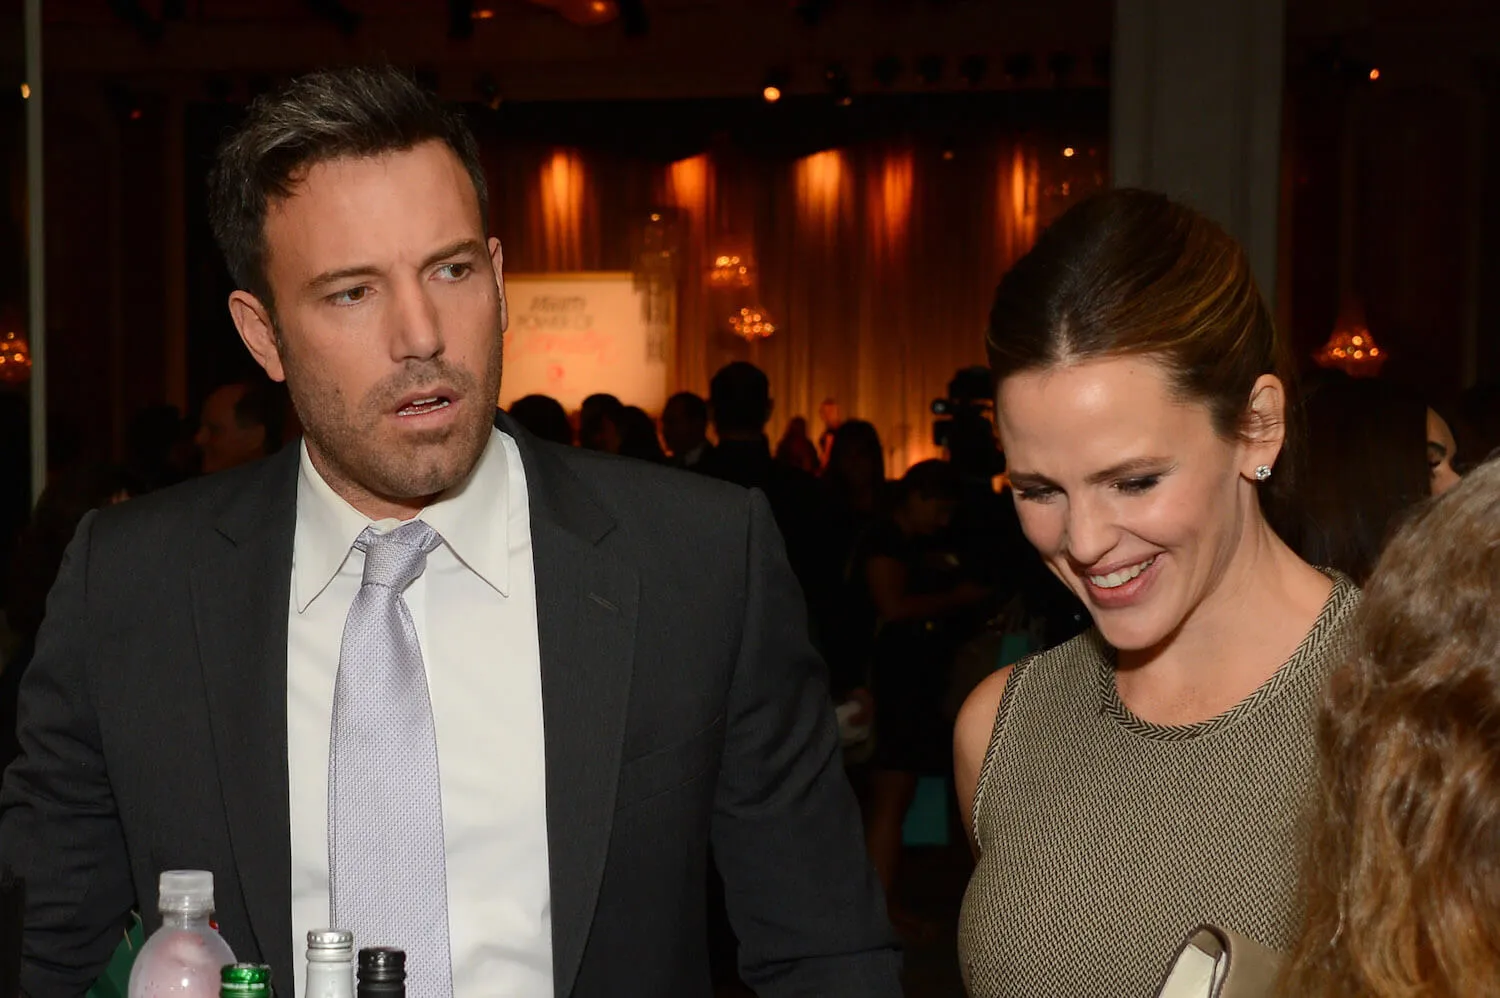 Ben Affleck and Jennifer Garner standing next to each other at Variety's 4th Annual Power of Women Event in 2012